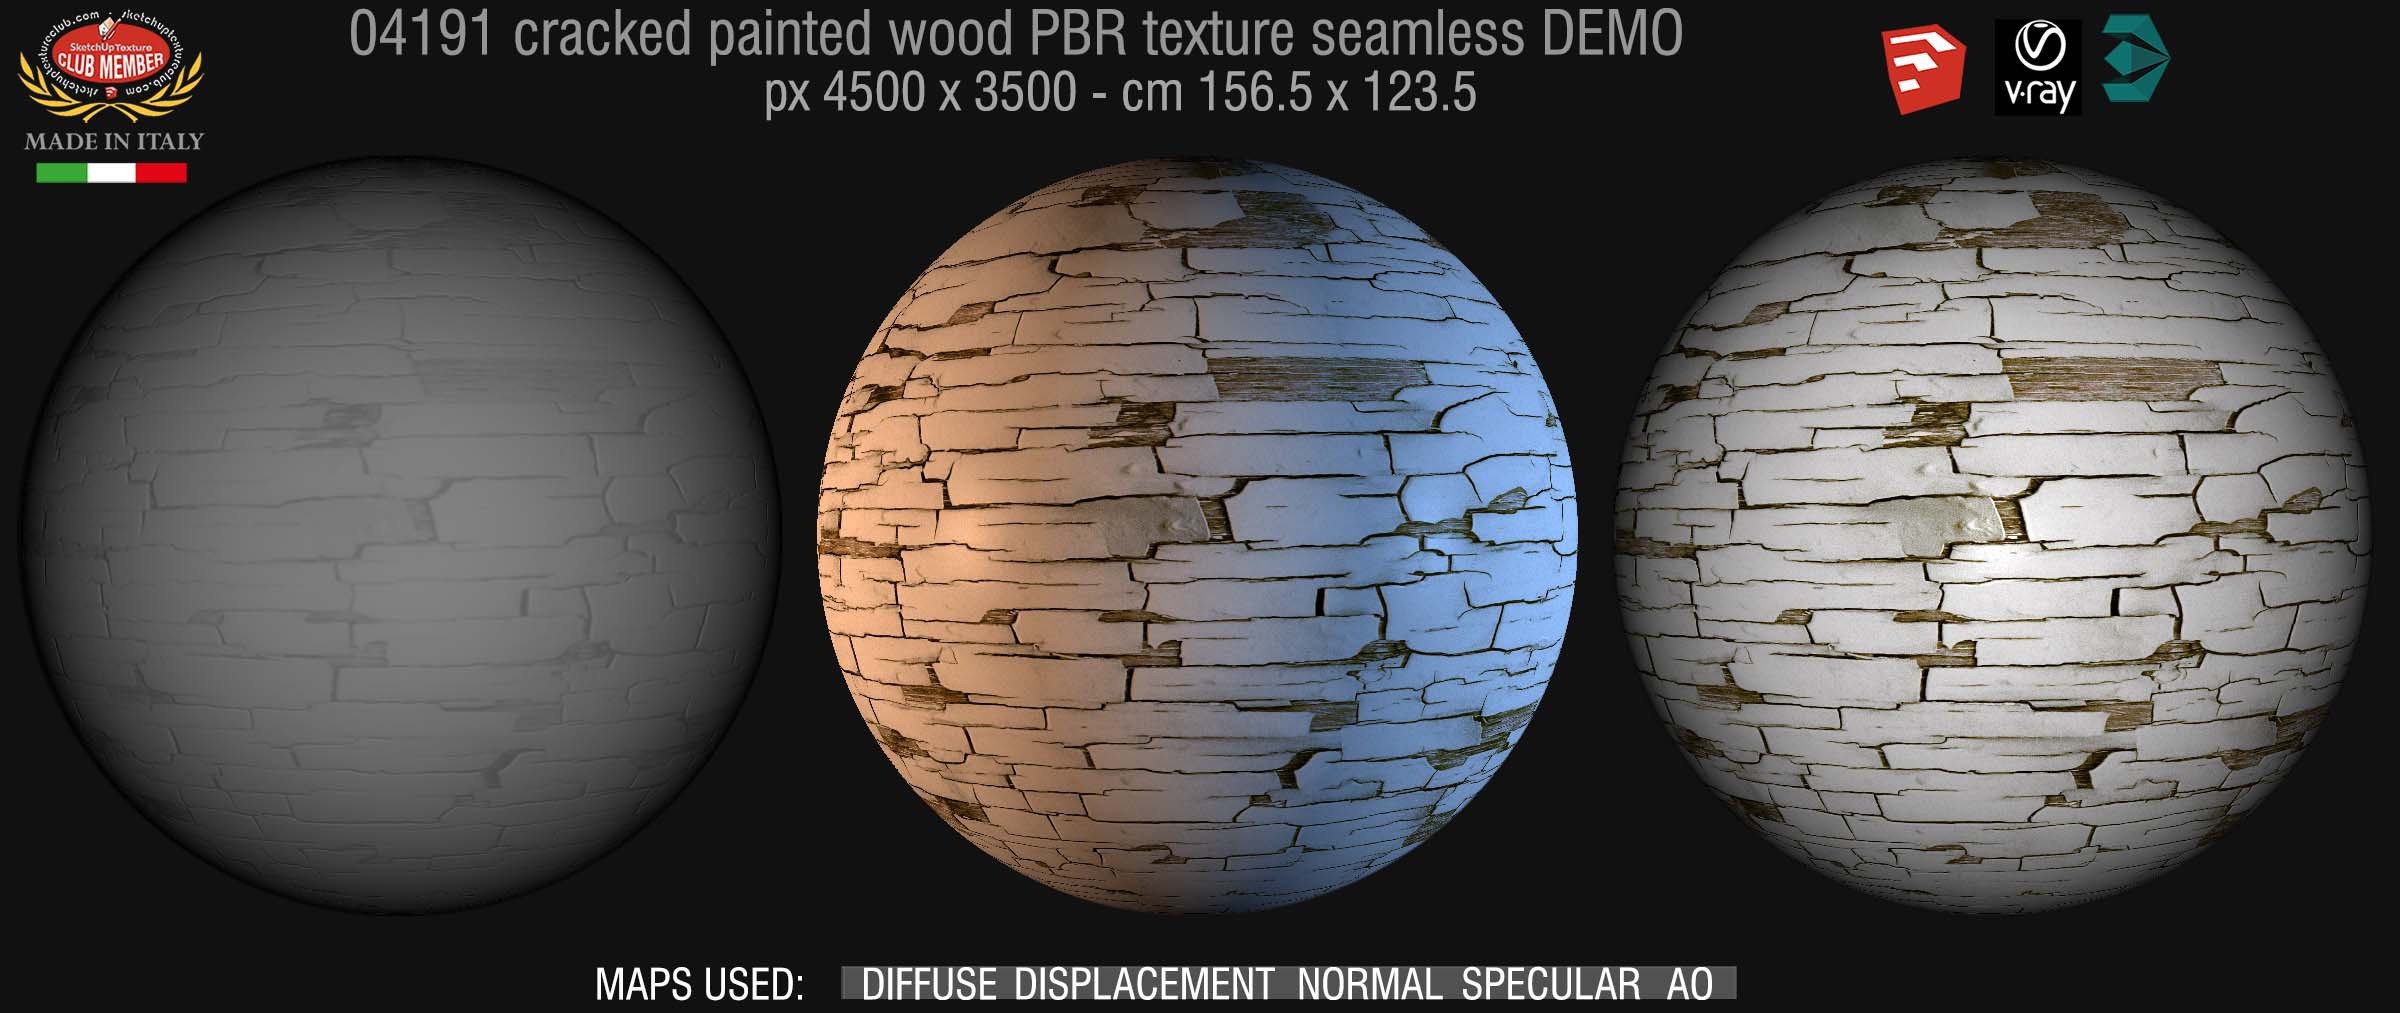 04191 cracked painted wood PBR texture seamless DEMO